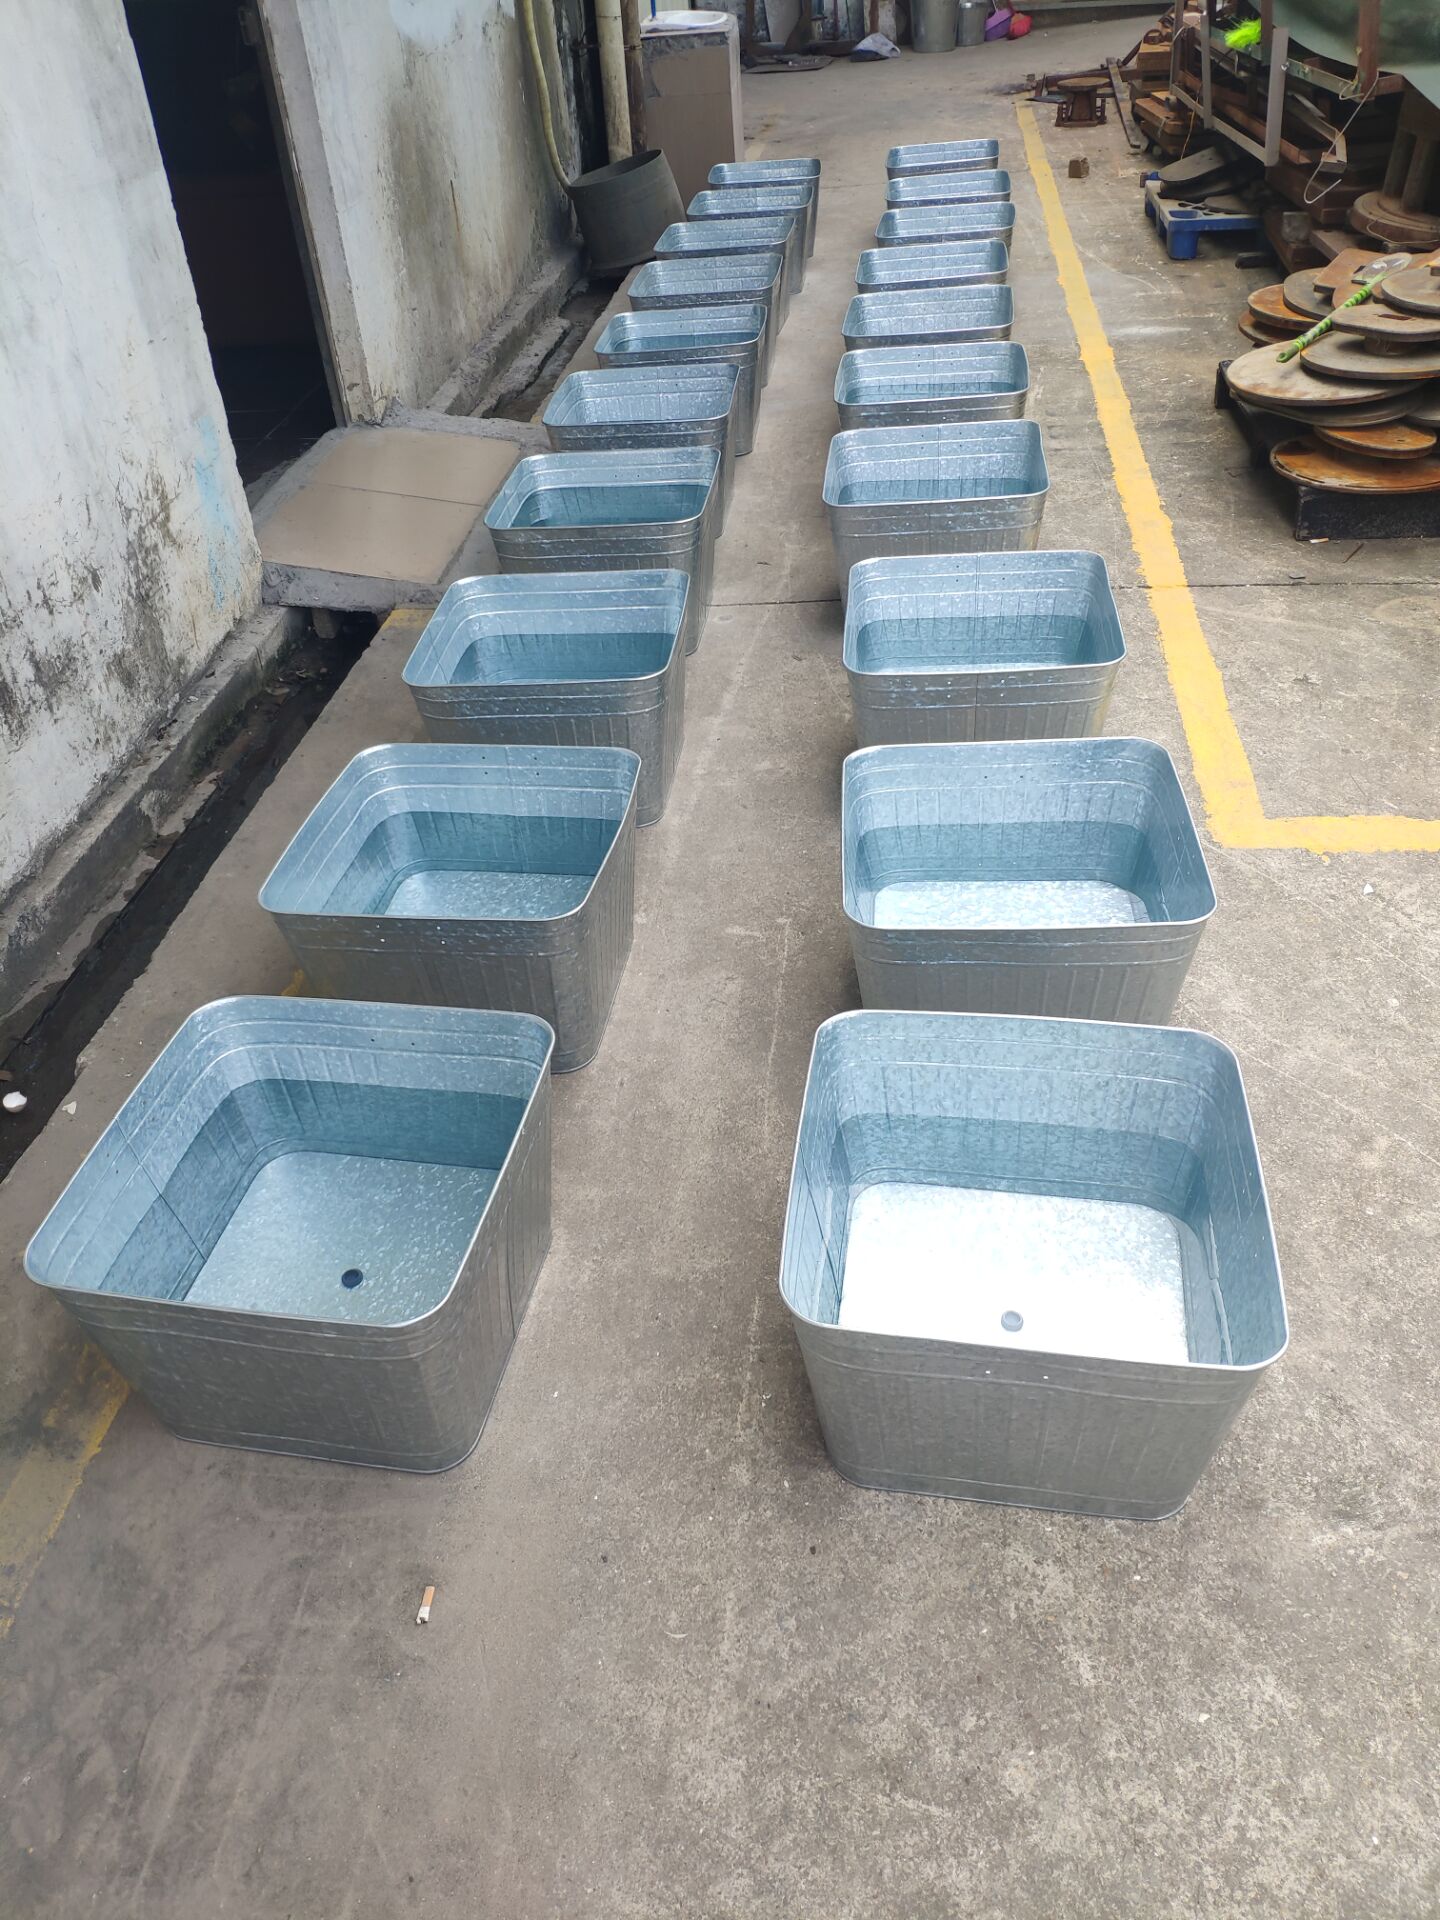 Ice bucket Waterproof testing for semi-finished goods quality is one of our monitor process